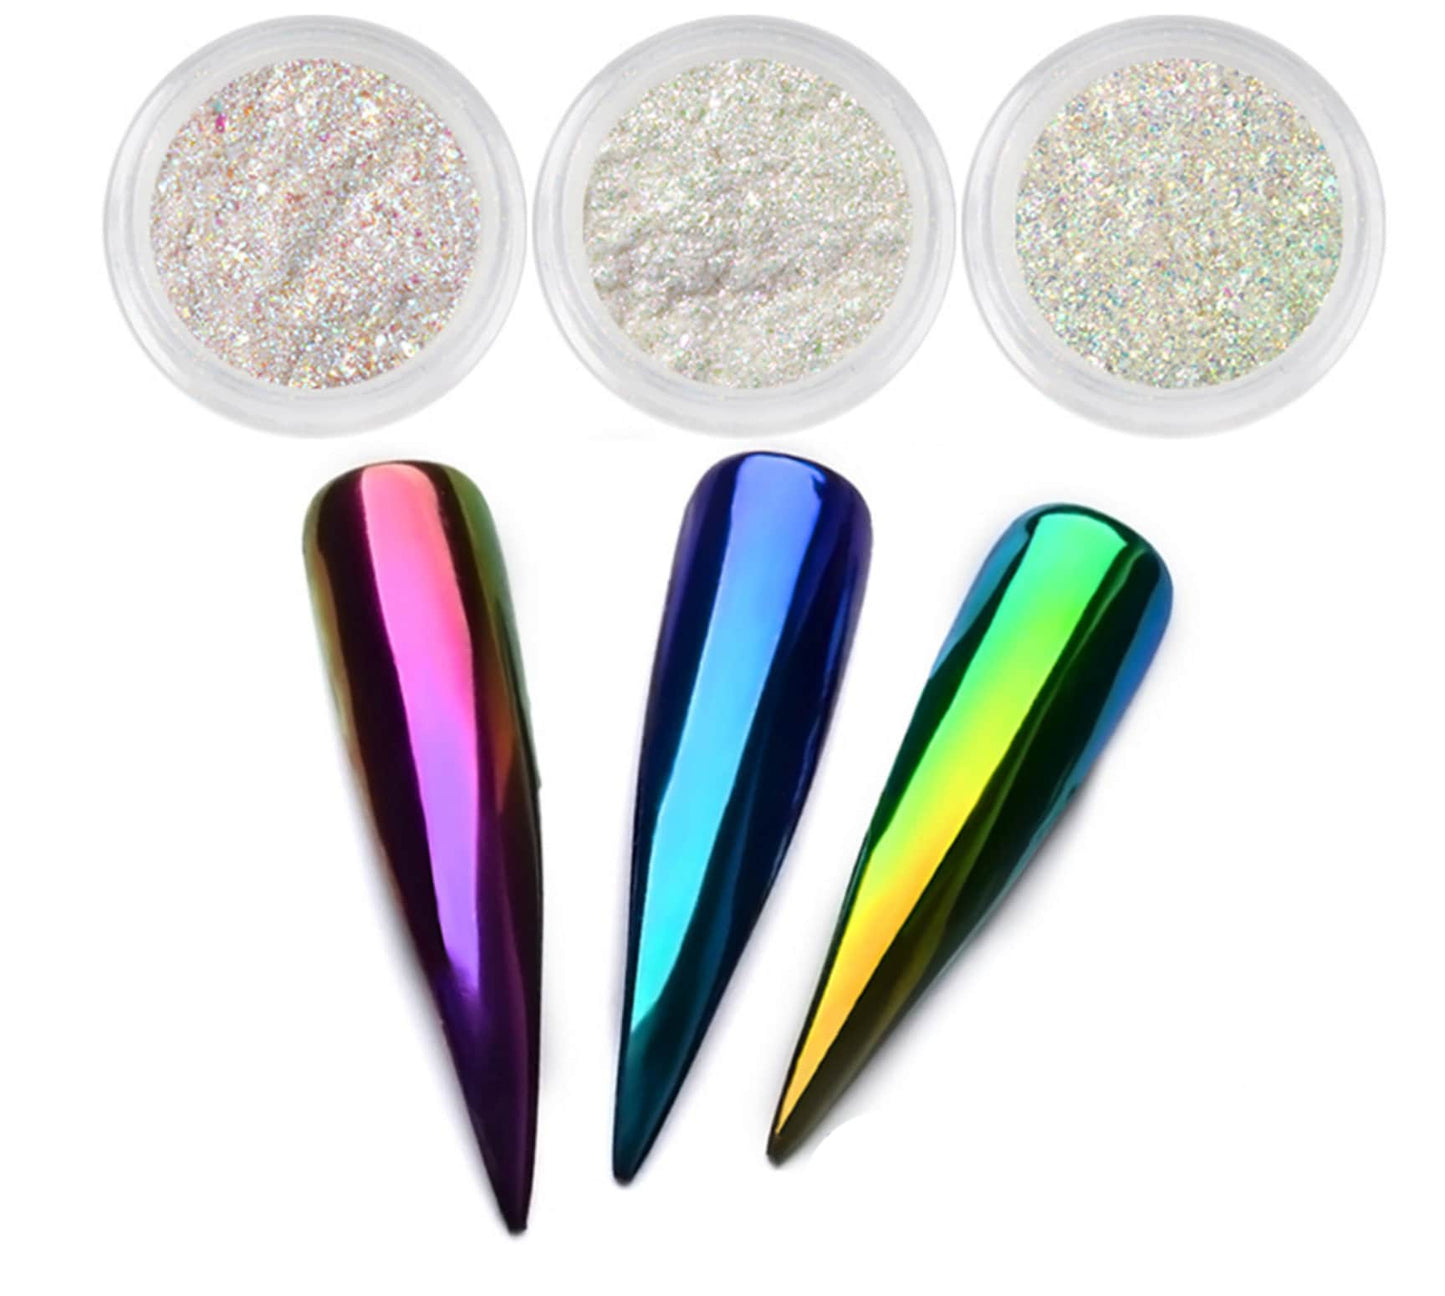 Chameleon Laser Shimmer Chrome Powder/ Ultra Fine Color Shift Pigment Glitter for Nails/ Shiny Glossy Mirrored Effect Nails Supply